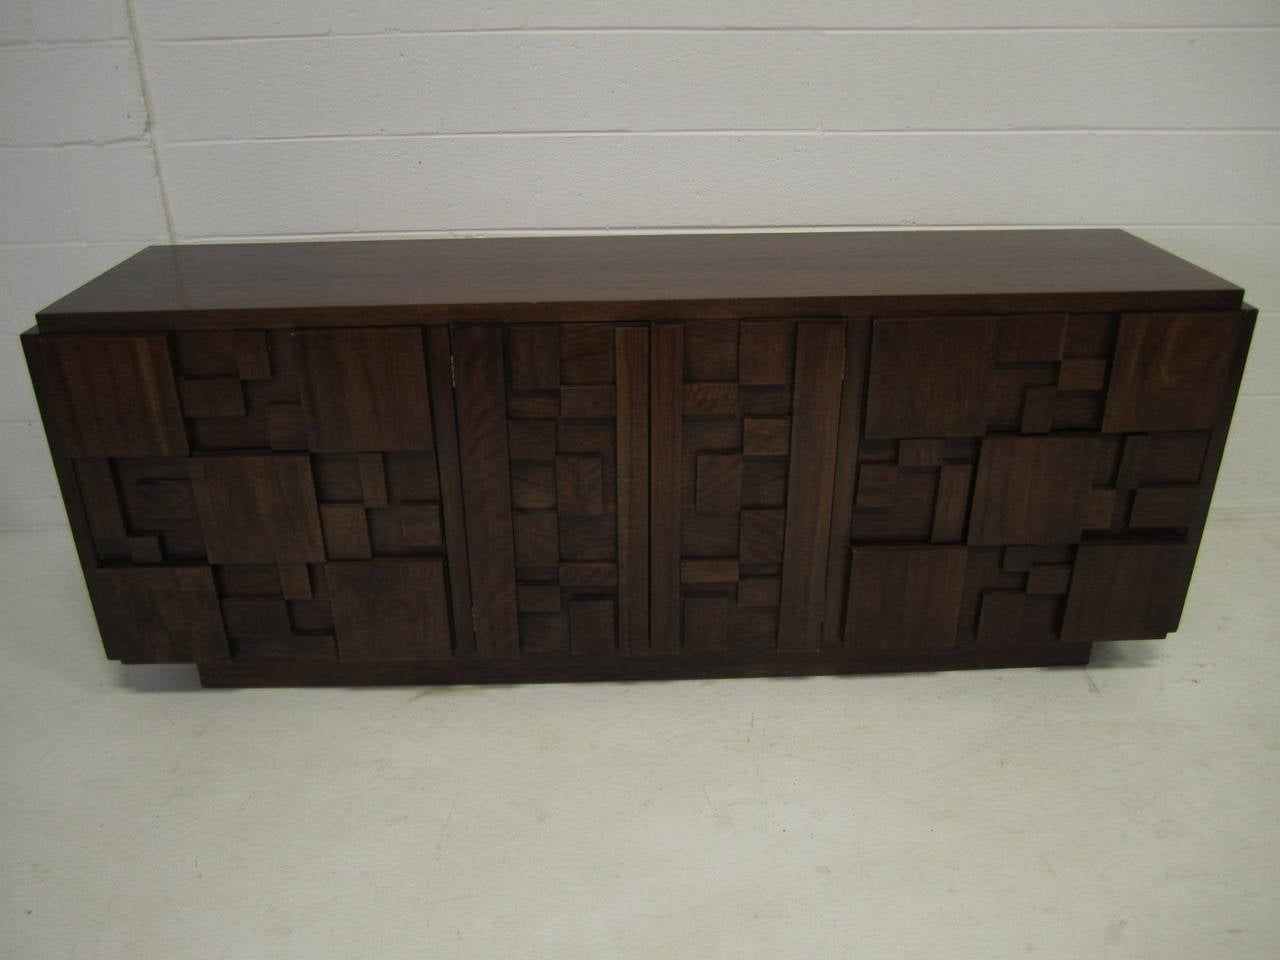 Handsome Paul Evans inspired chunky walnut mosaic credenza made by Lane. This piece is in very nice vintage condition and is very well made. The top has it original finish and looks quite nice. I have several other pieces from the same collection.